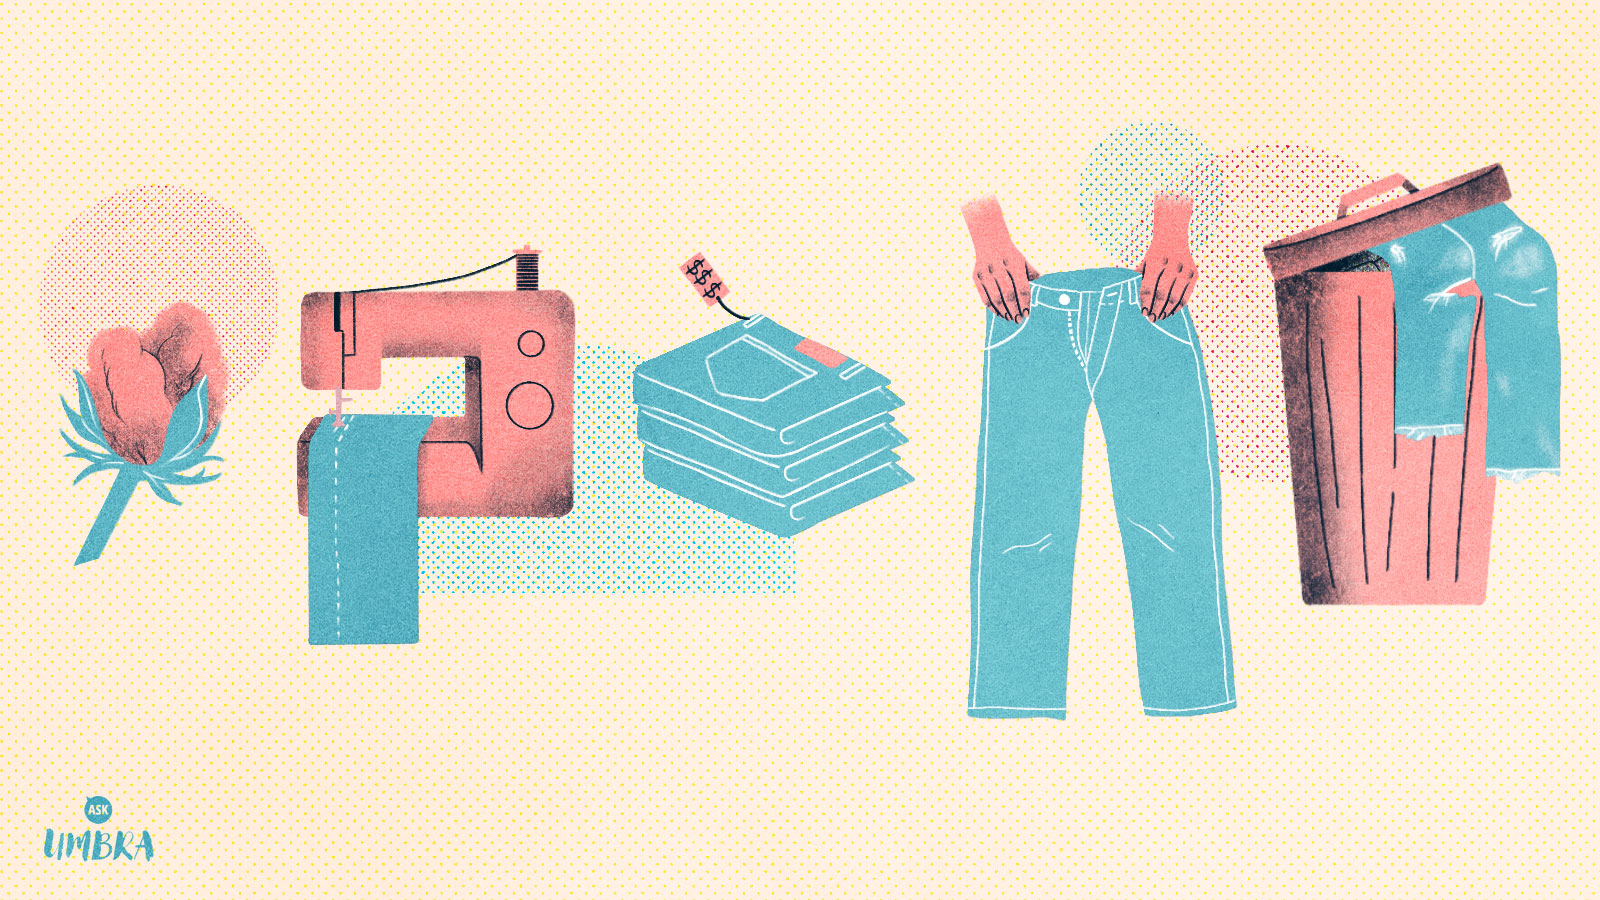 An illustration of (from left to right) a cotton bud, a sewing machine sewing jeans, a stack of jeans with a price tag, a pair of hands holding up jeans, and a garbage can with jeans hanging out of them.